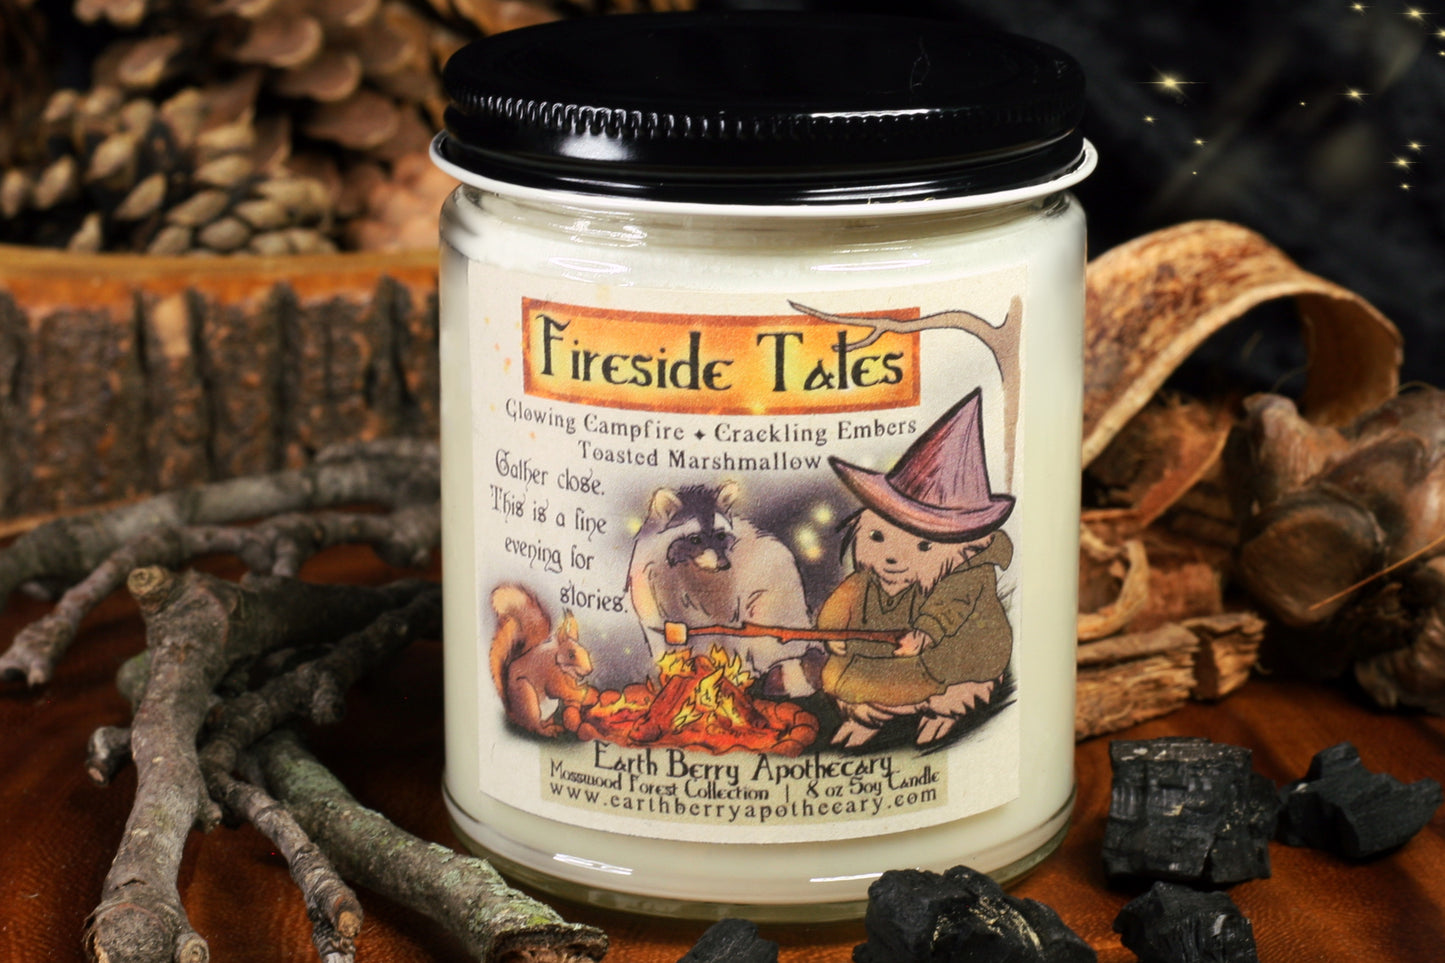 Fireside tales soy candle with the hedge witch roasting a marshmallow and talking with a squirrel and a raccoon. The scent is campfire and toasted marshmallow.